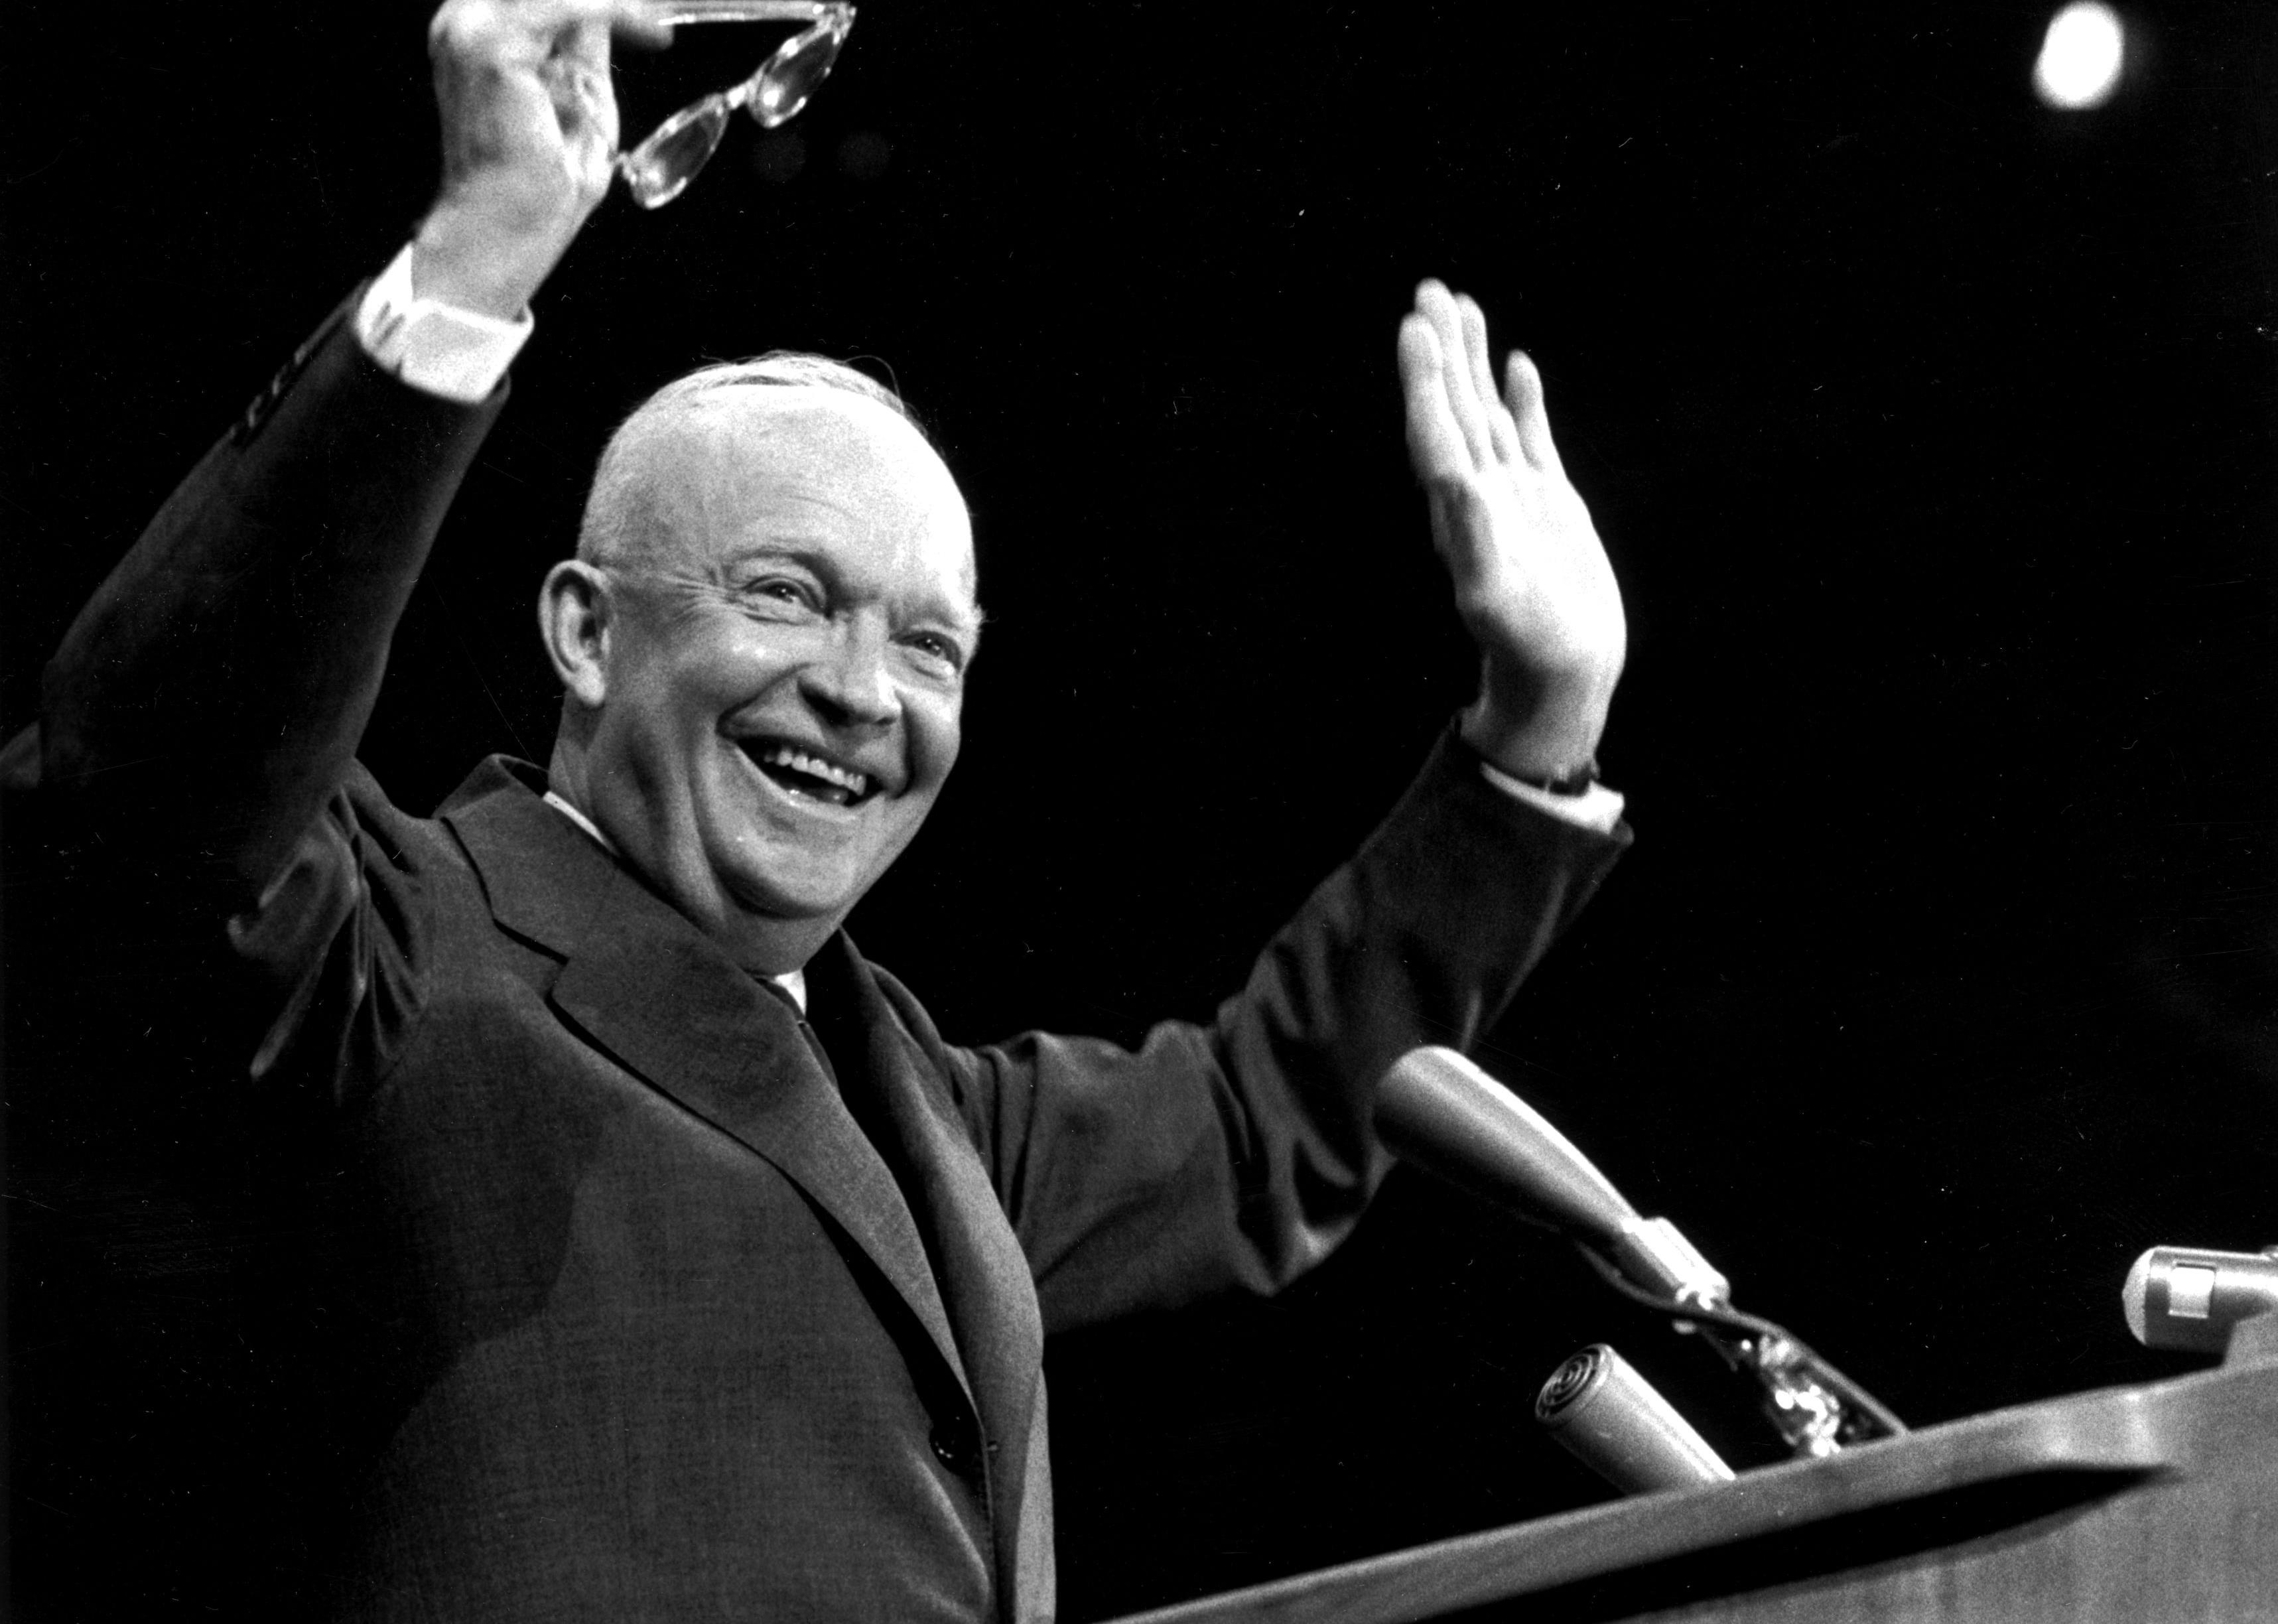 Dwight D. Eisenhower smiling and waving onstage.